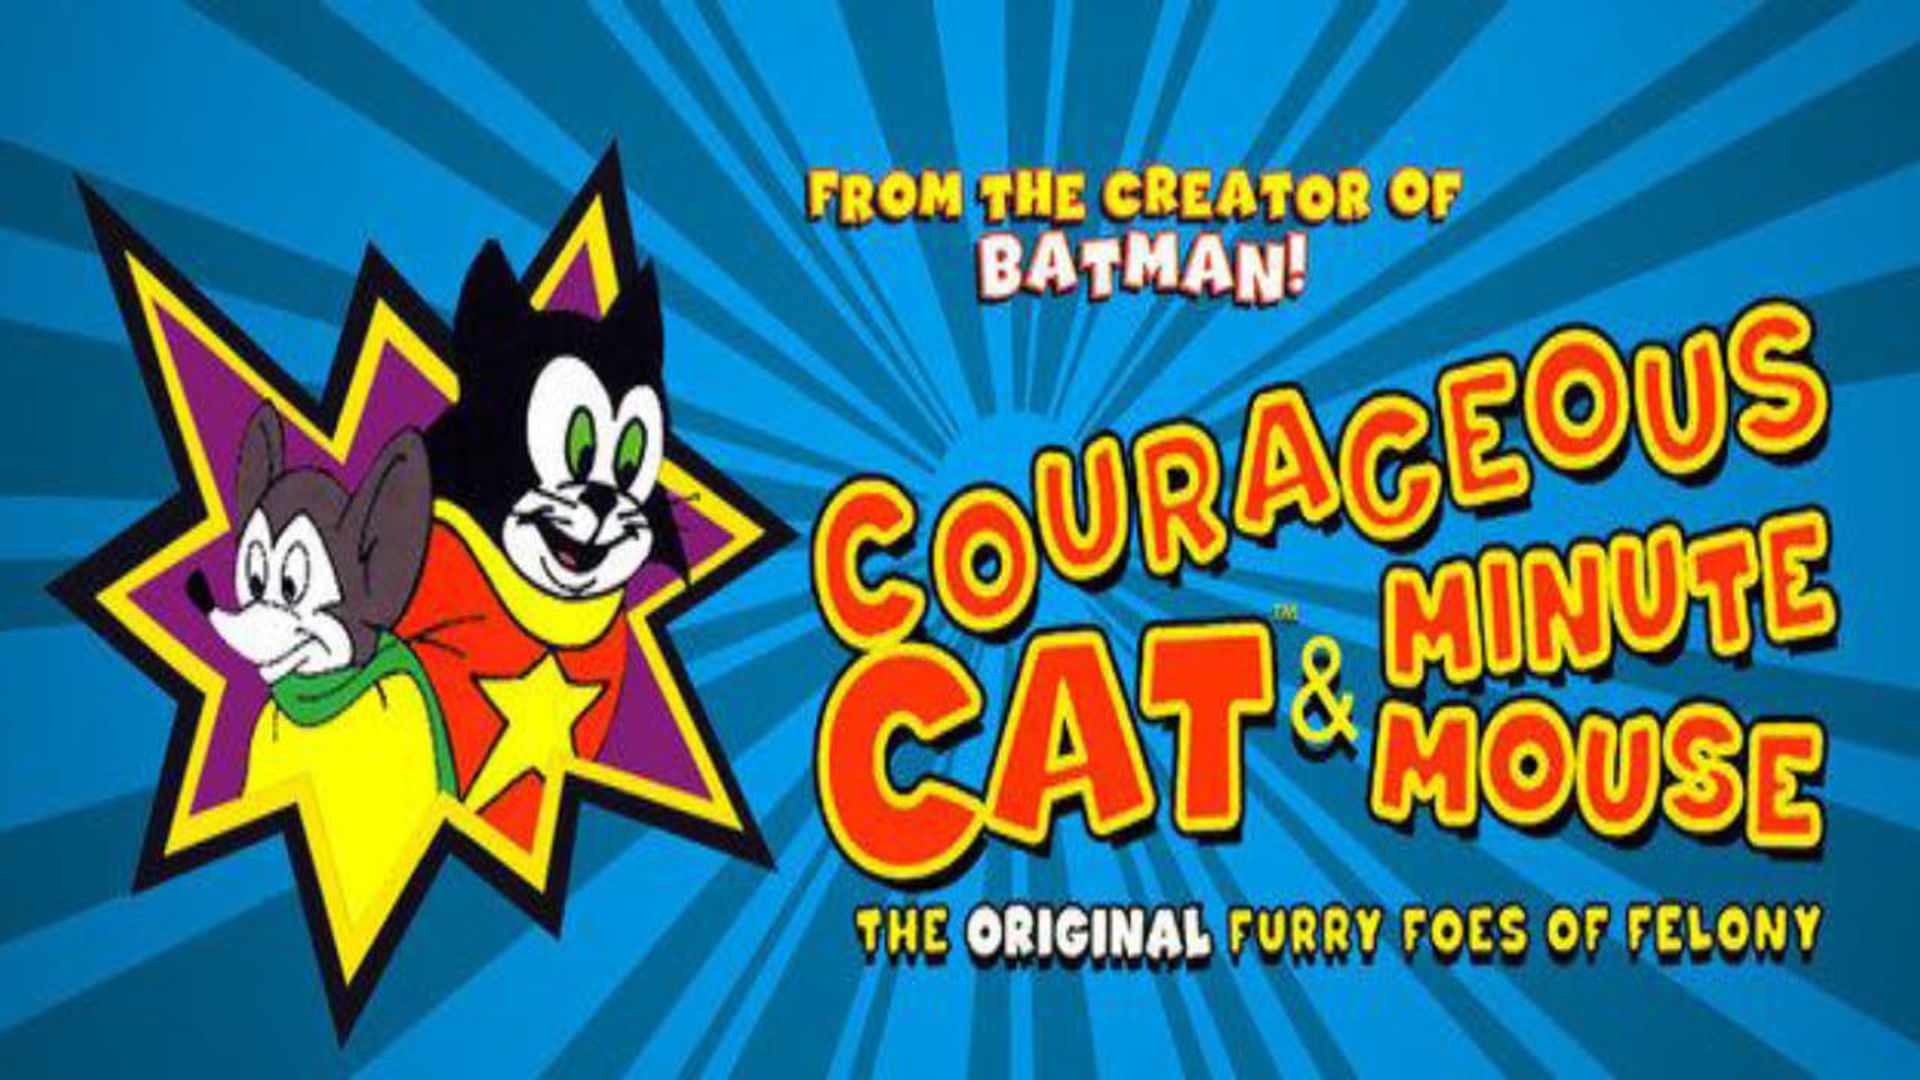 Courageous Cat and Minute Mouse background